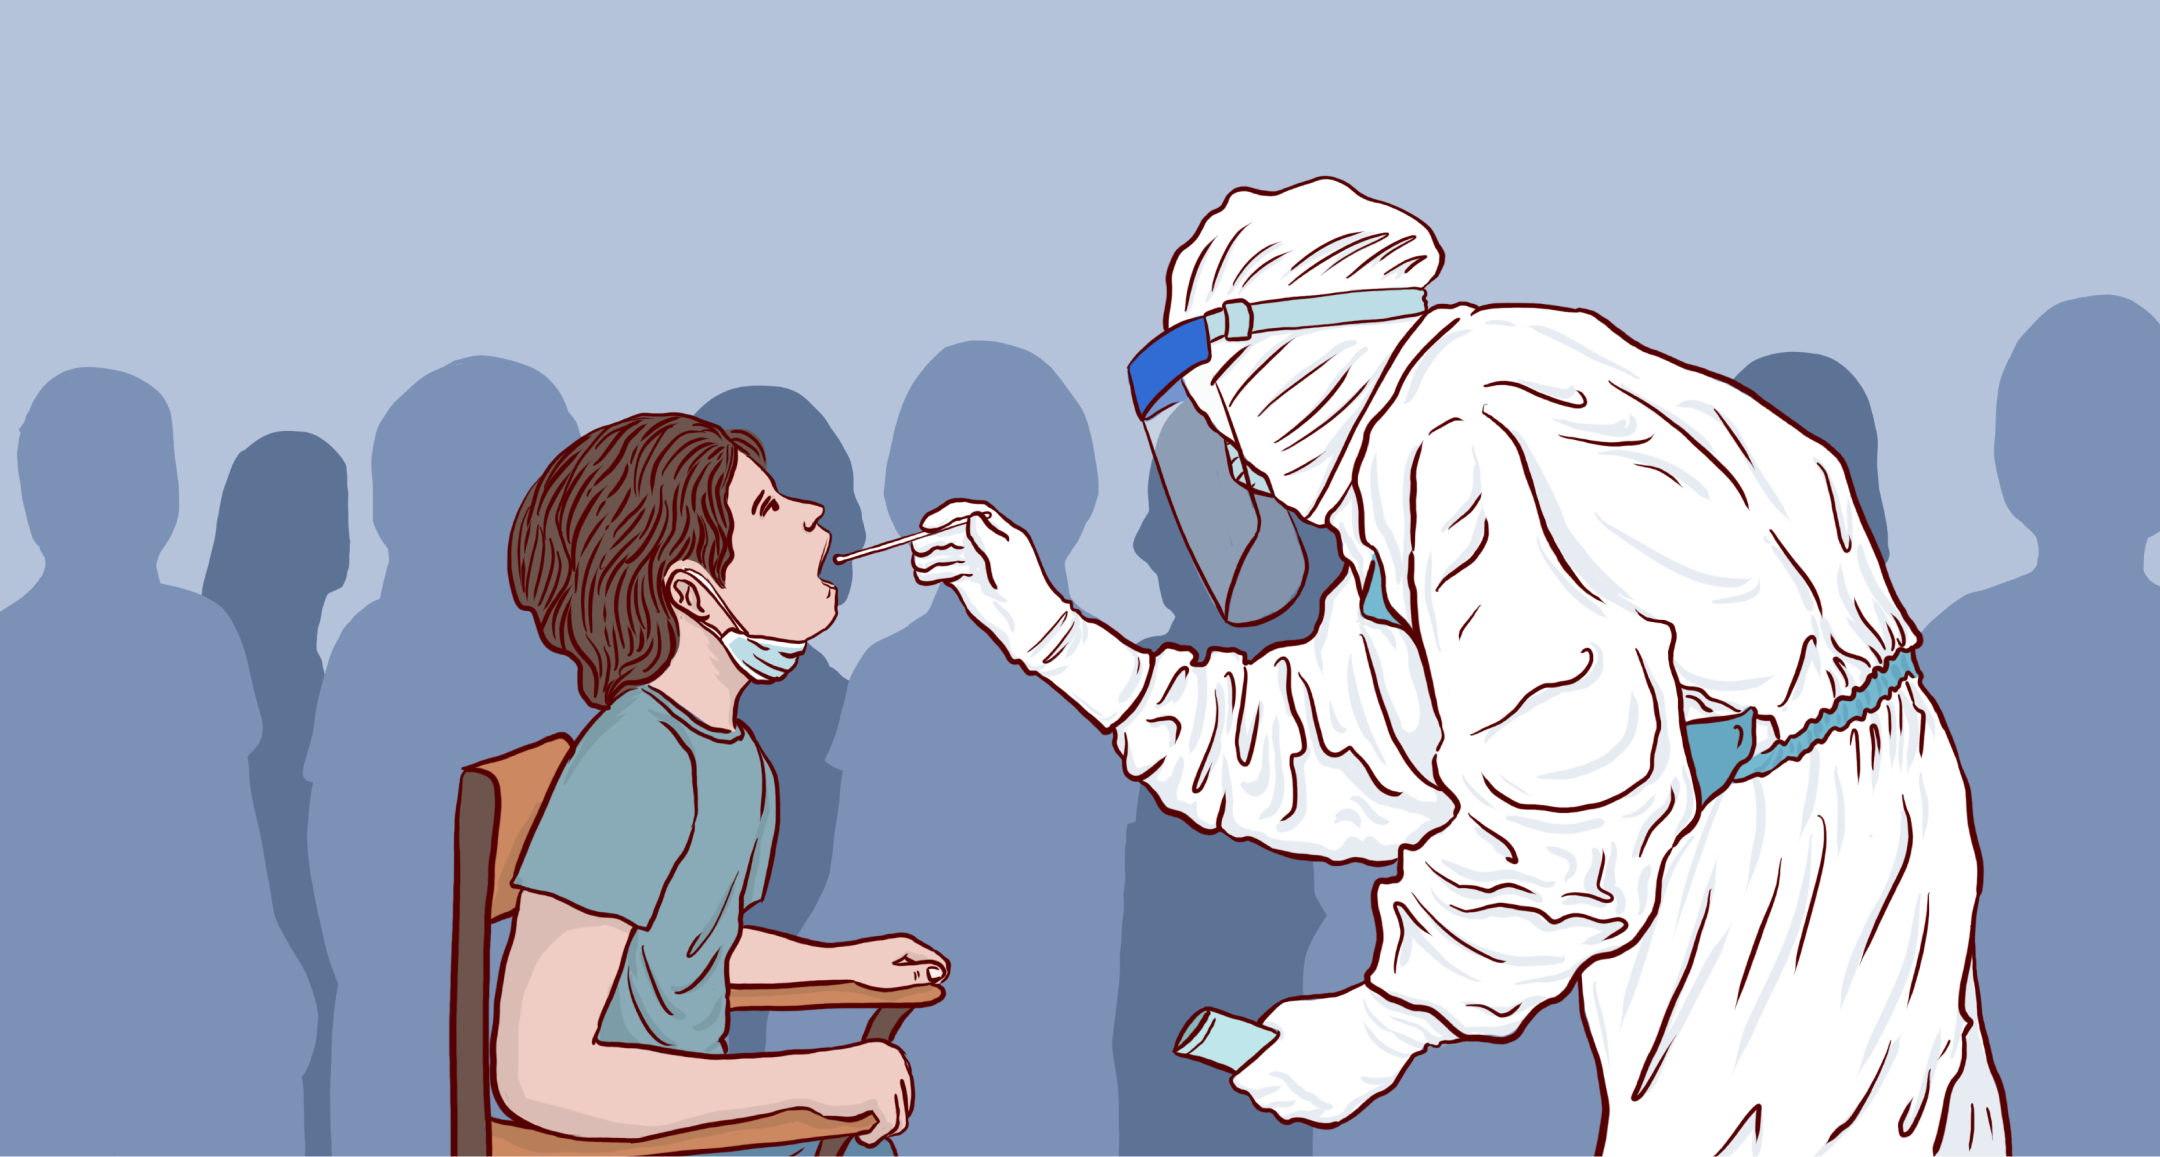 A minimalist cartoon illustration of a doctor in personal protective equipment administering a swab test on an individual.